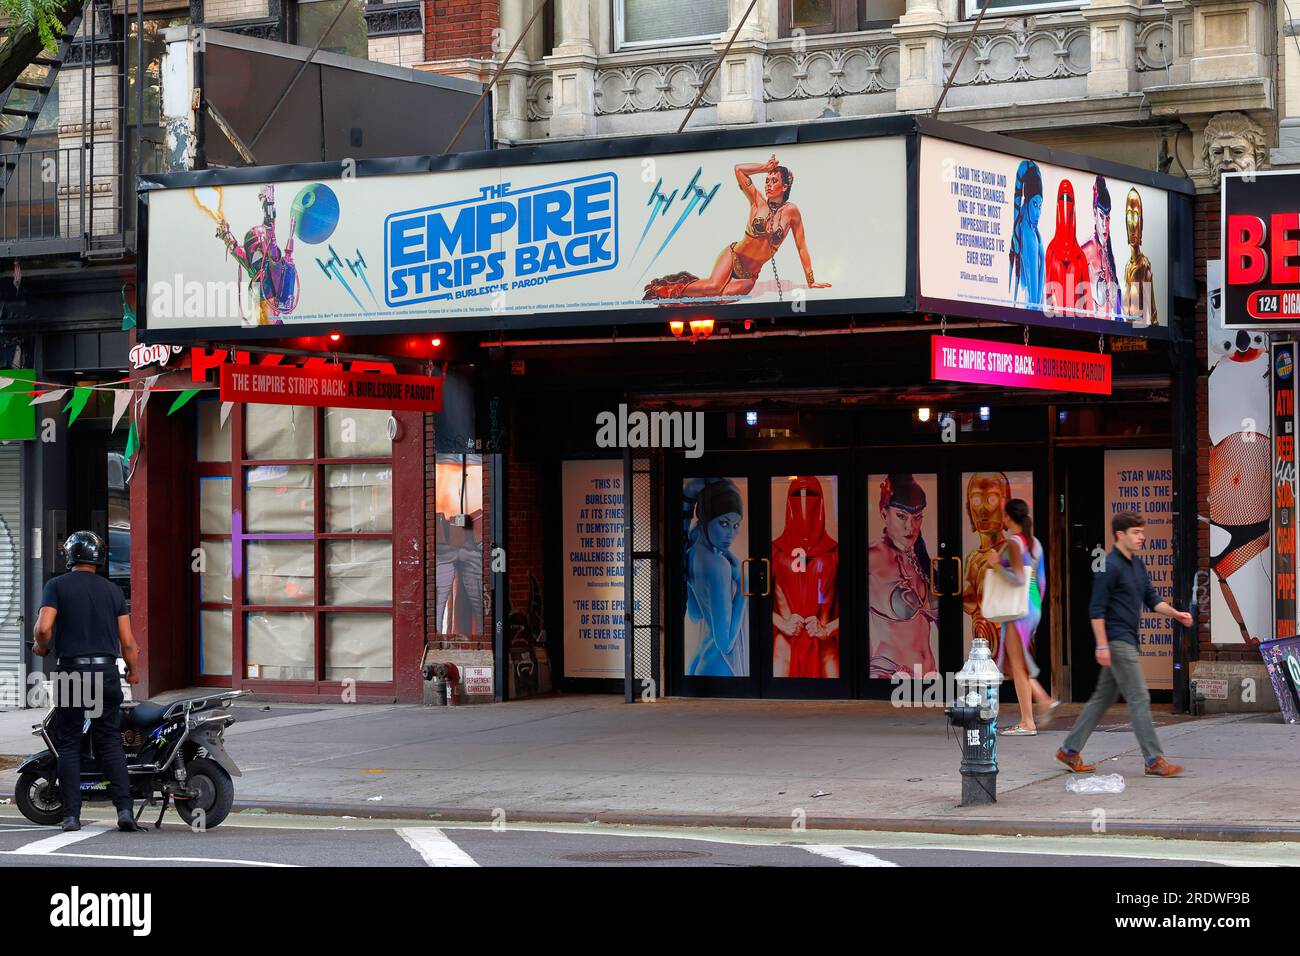 People Walking by 'Empire Strips Back' spettacolo al Teatro Orpheum, 126 2nd Ave, New York, nel quartiere East Village di Manhattan. Foto Stock